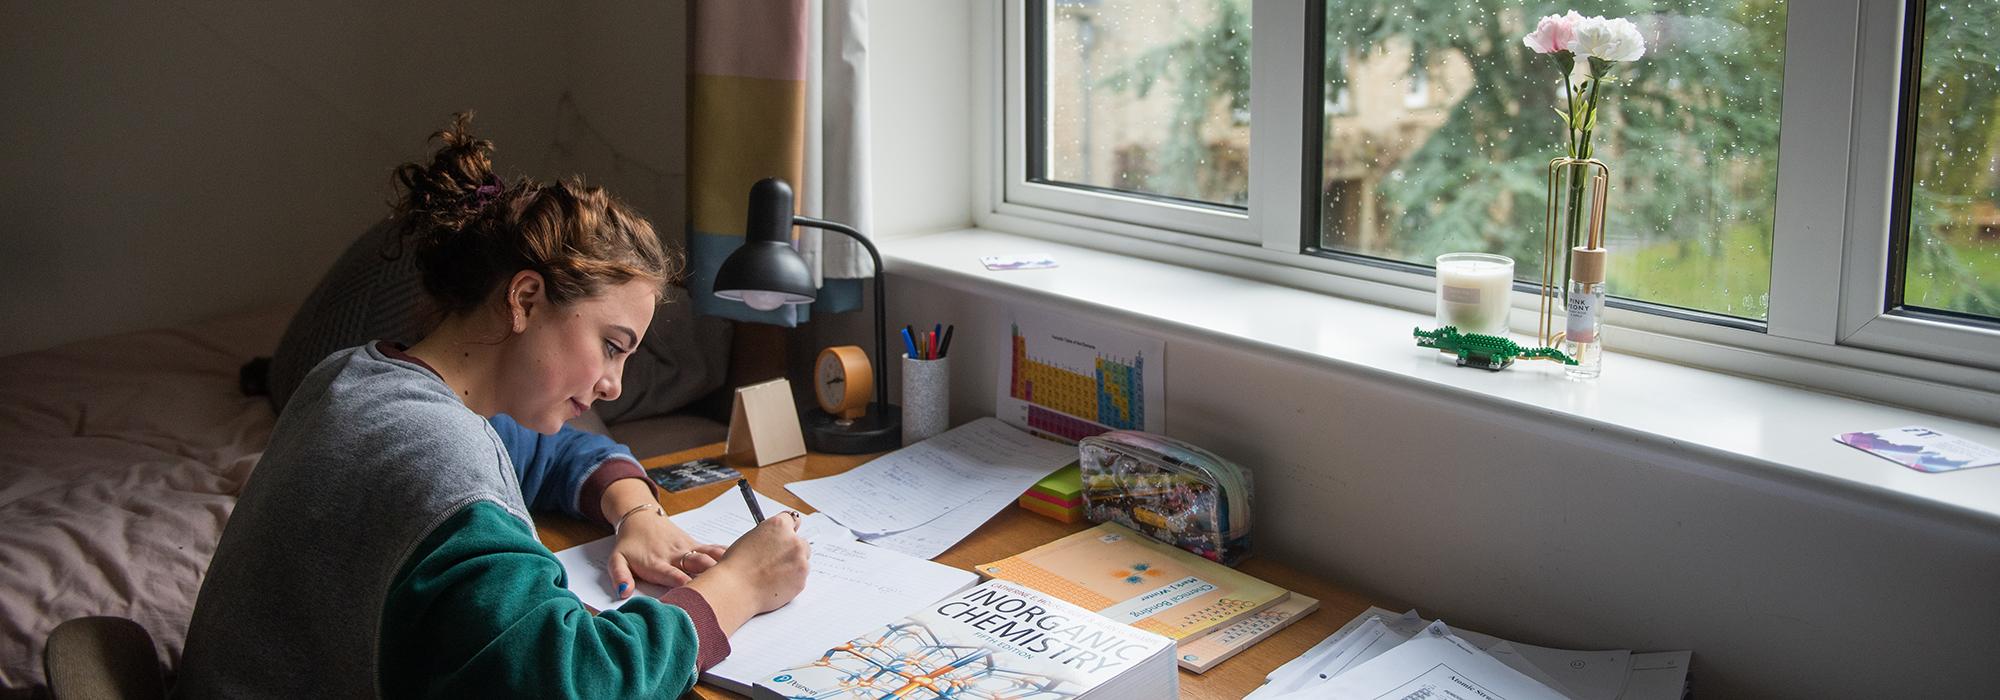 A student in their room in North Lodge, 2019 - Photo: © John Cairns - www.johncairns.co.uk